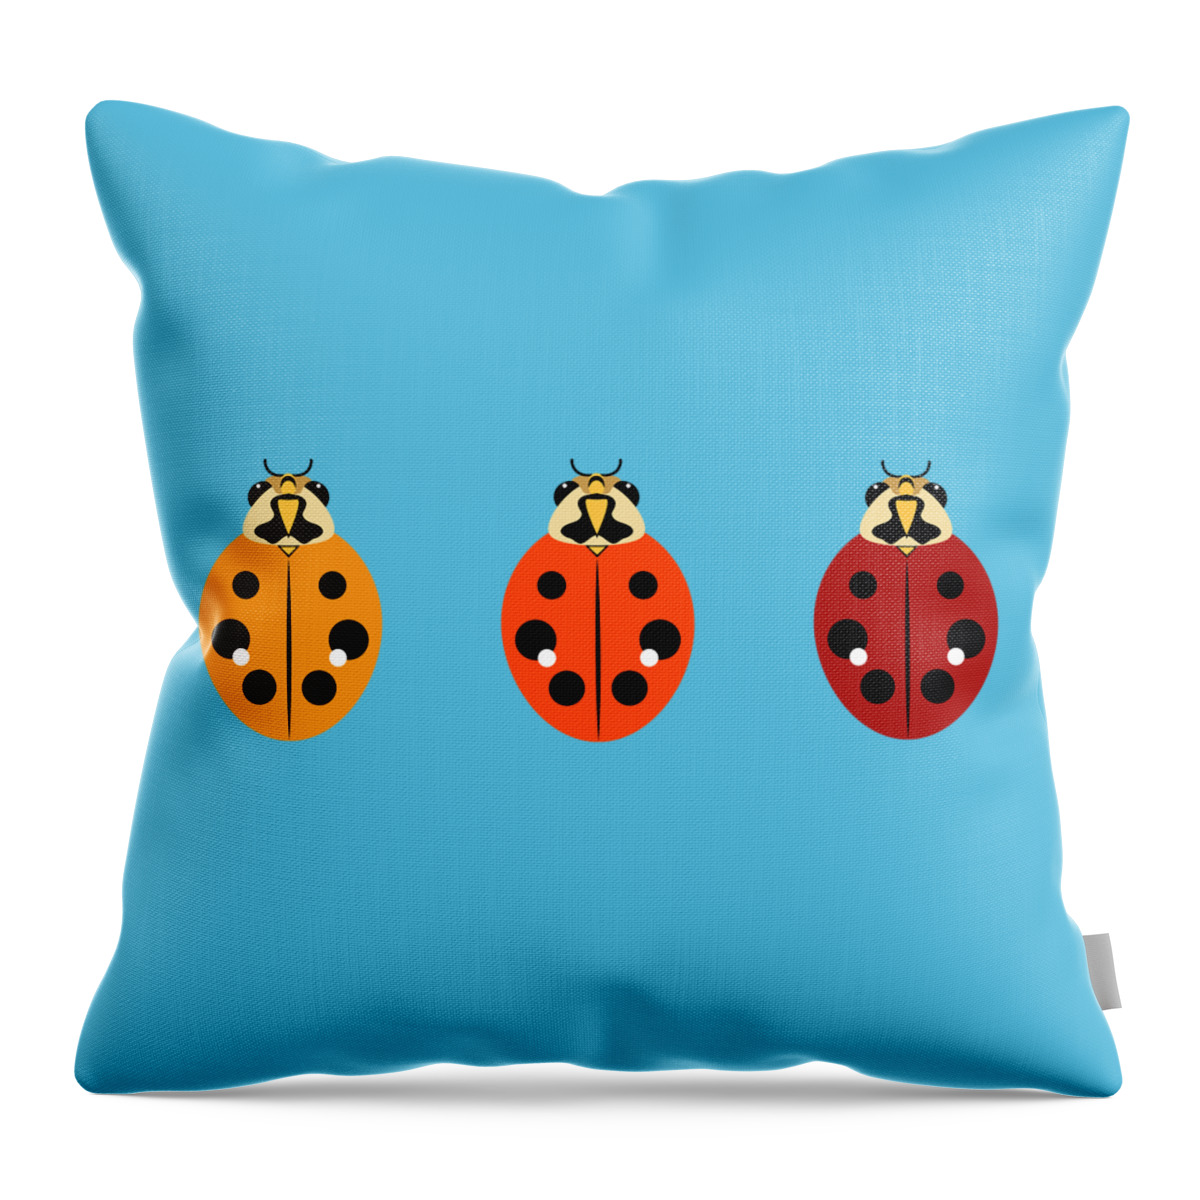 Graphic Animal Throw Pillow featuring the digital art Ladybug Trio Horizontal by MM Anderson